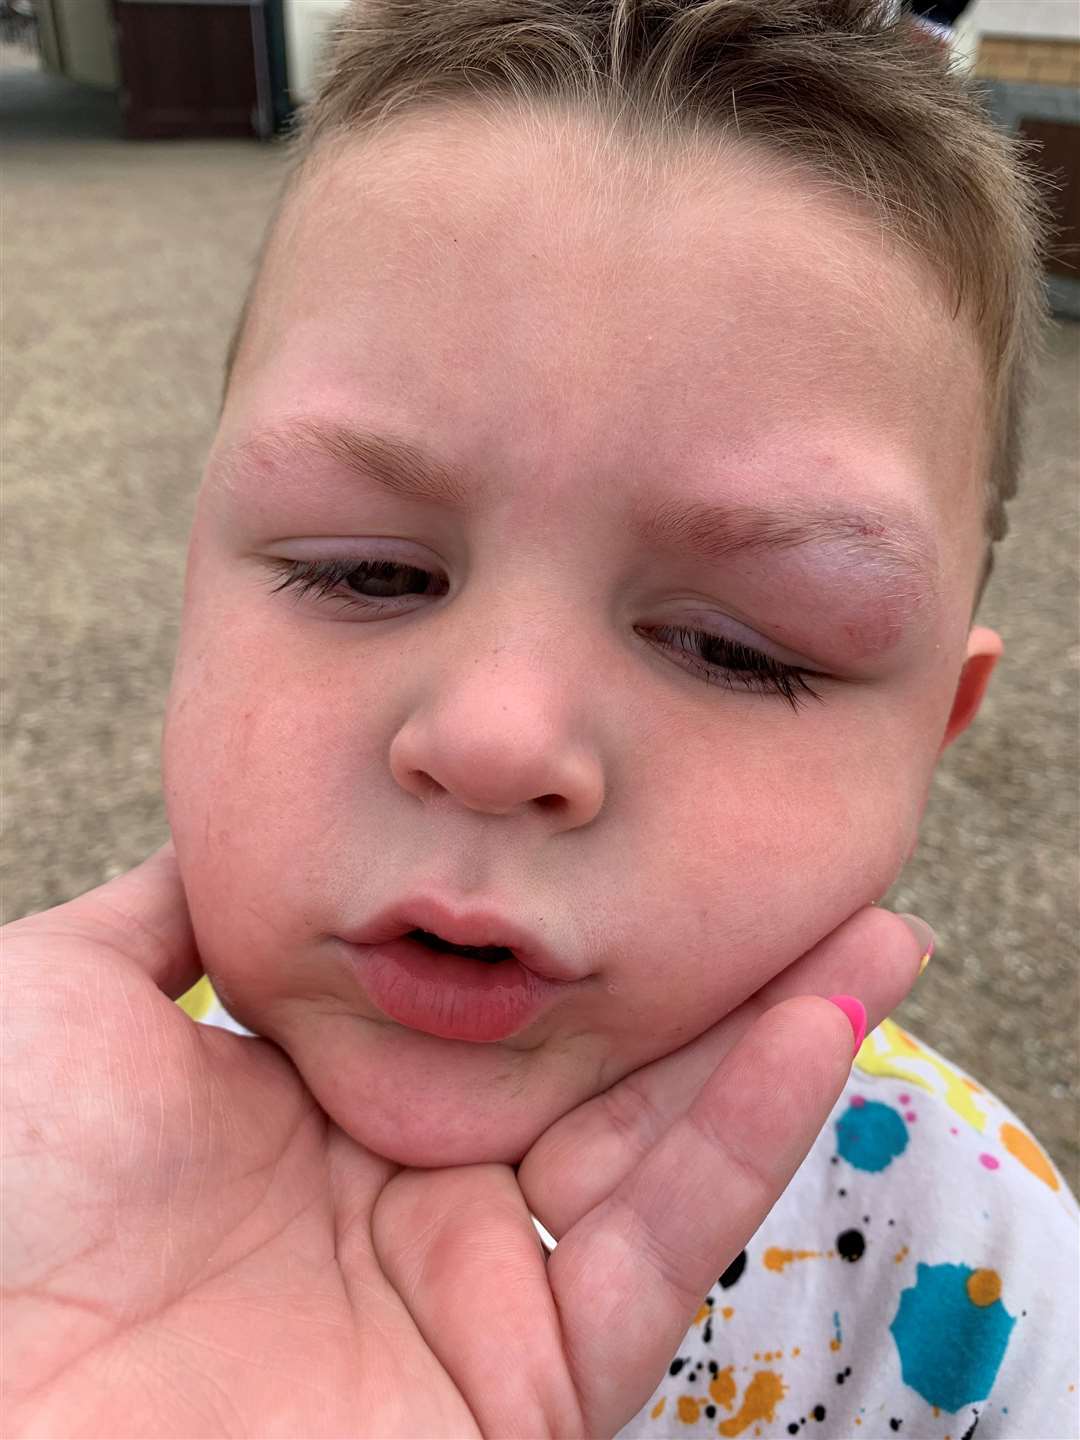 The swelling was noticable immediately after the four-year-old was conked on the head